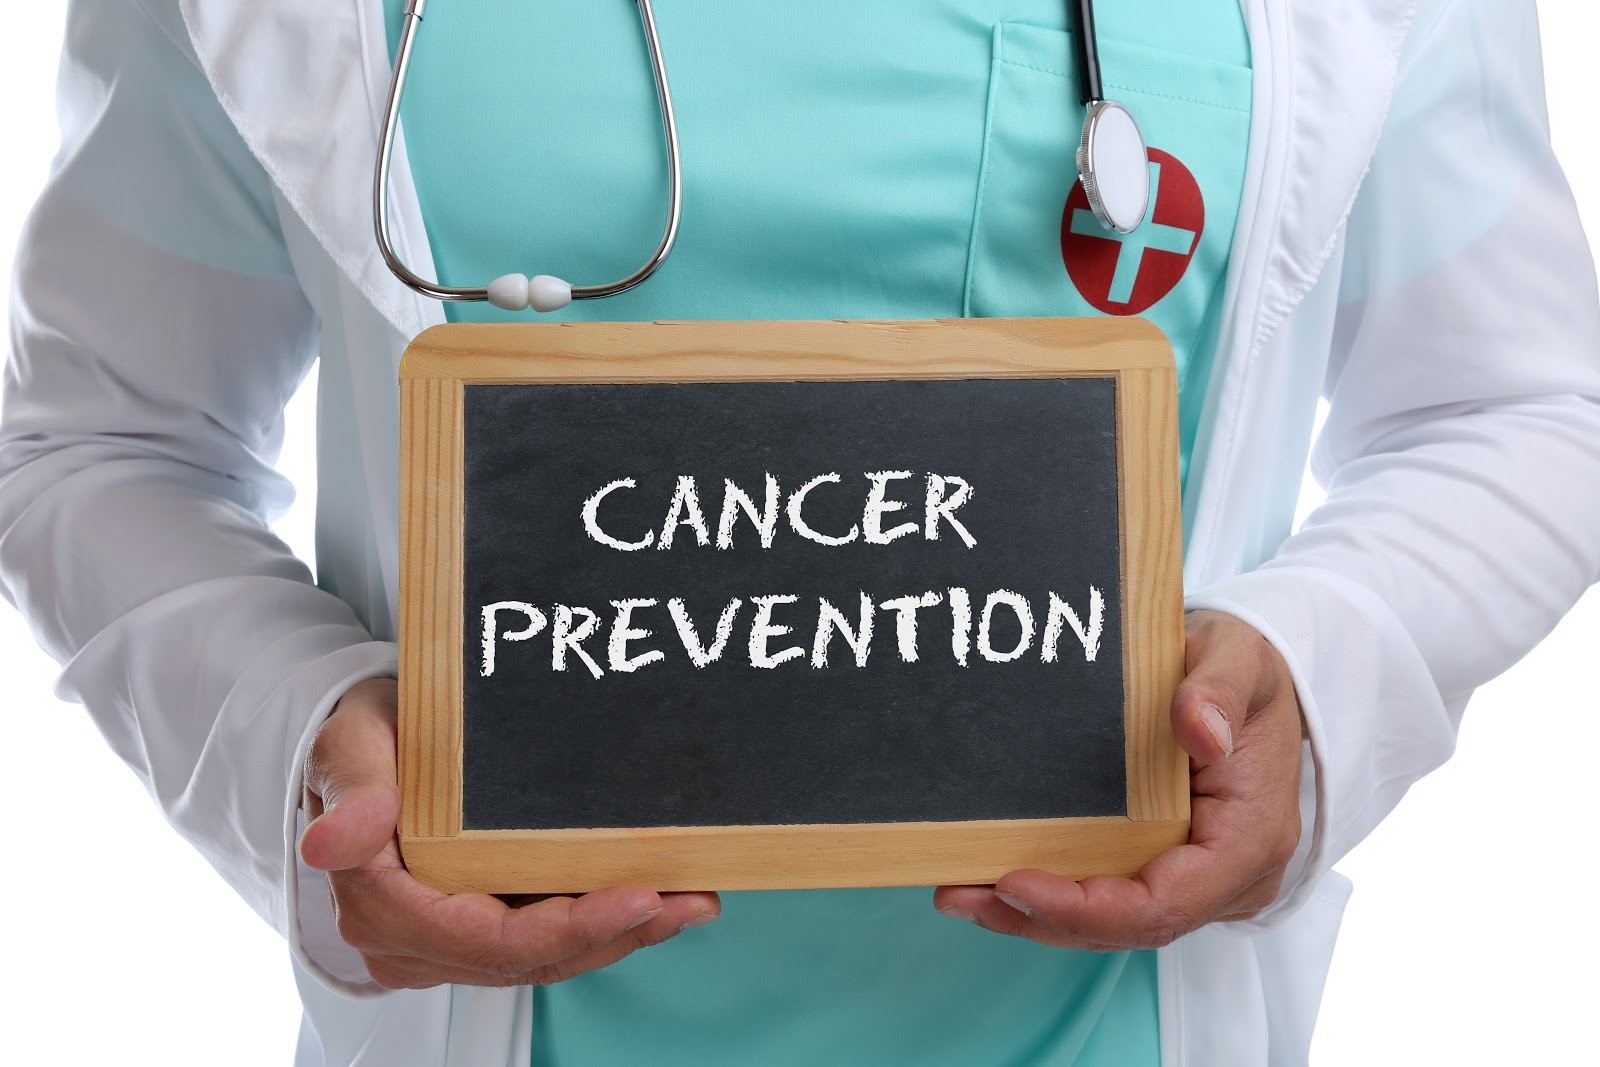 Shield Yourself: Top Cancer Prevention Strategies – Lifestyle, Vaccines & More